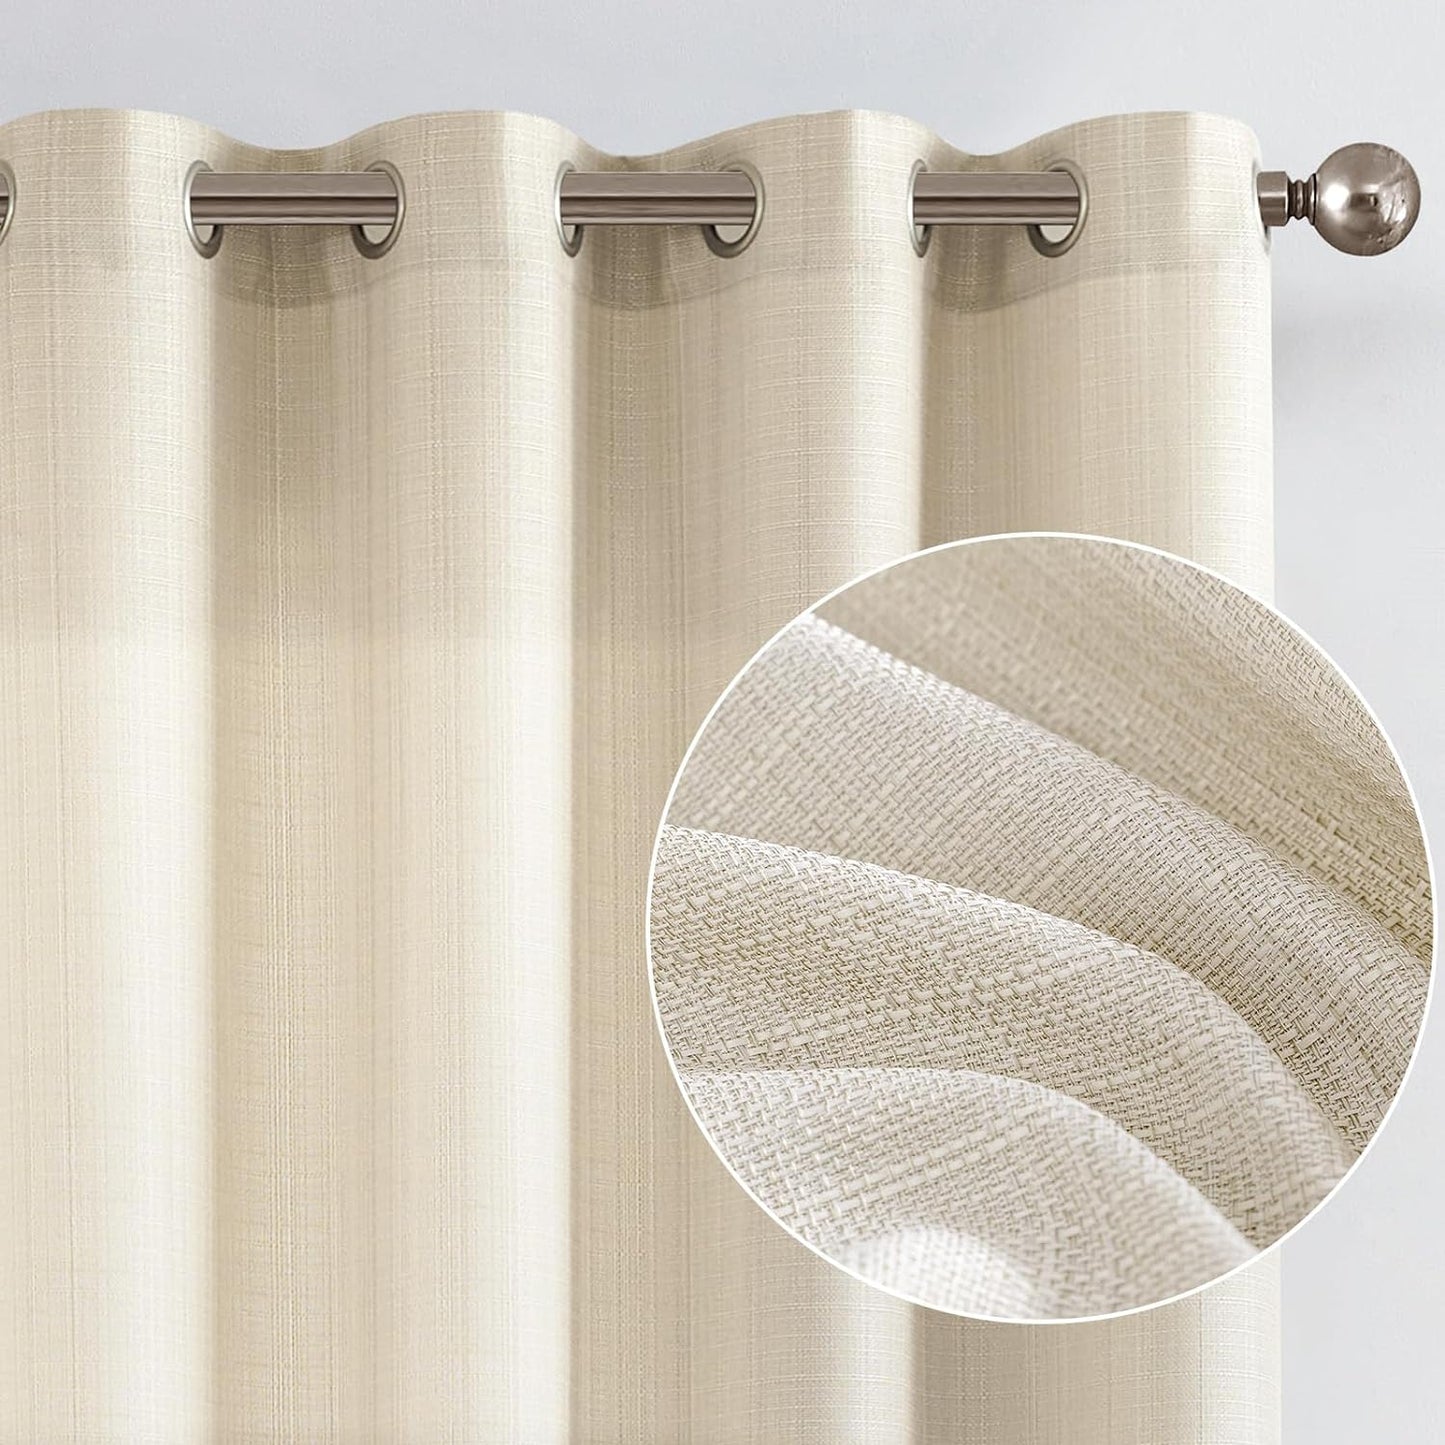 COLLACT White Linen Textured Curtains 84 Inch Length 2 Panels for Living Room Casual Weave Light Filtering Semi Sheer Curtains & Drapes for Bedroom Grommet Top Window Treatments, W38 X L84, White  COLLACT Grommet Heathered Beige W52 X L84 